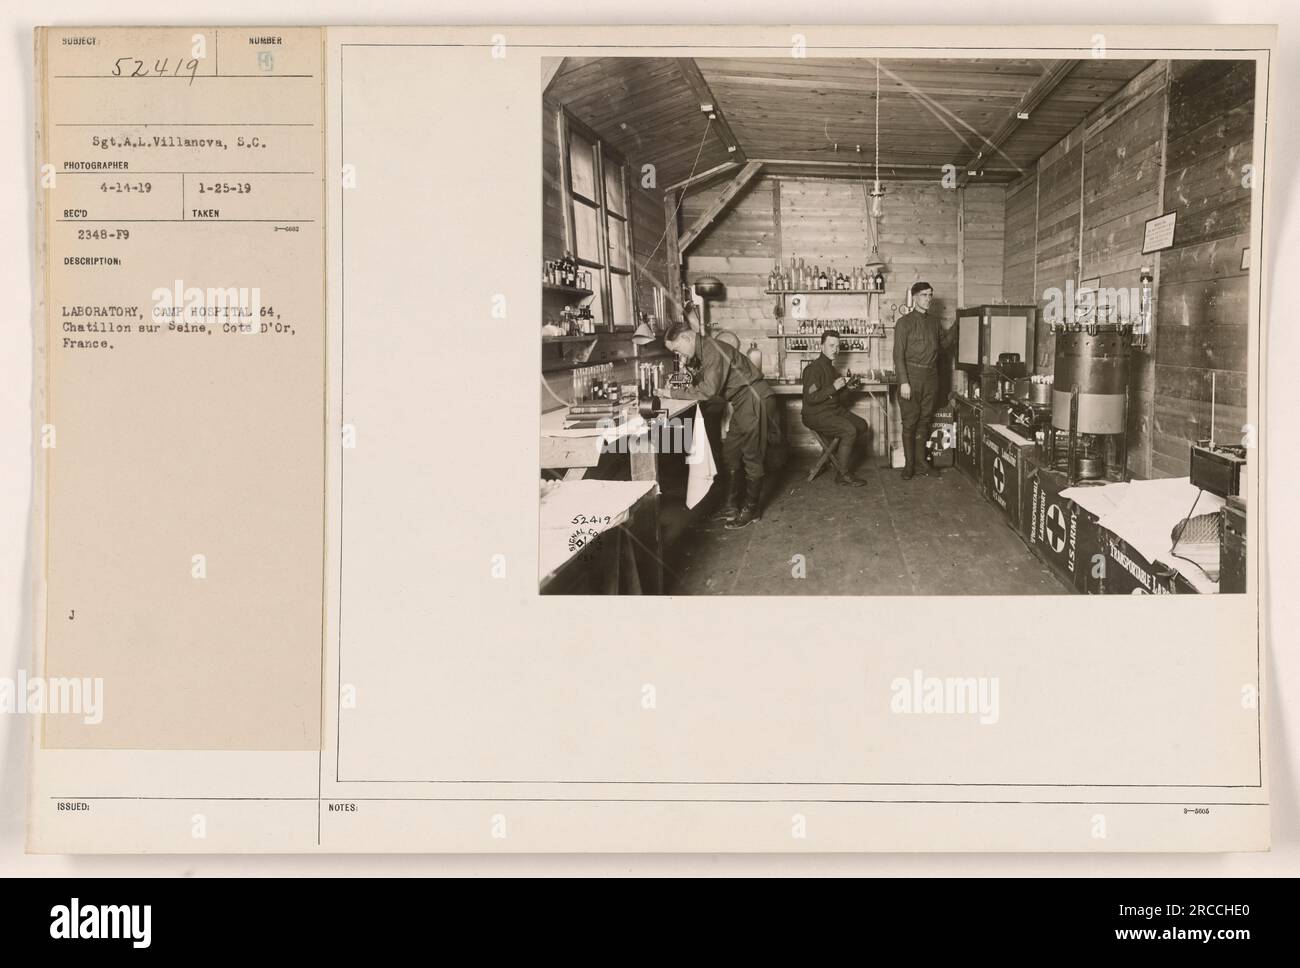 Camp Hospital 64 in Chatillon sur Seine, France, during World War One. The photograph shows a laboratory, where medical personnel are working. Taken by Sgt. A.L. Villanova on April 14, 1919. Notation number: 52419. Stock Photo